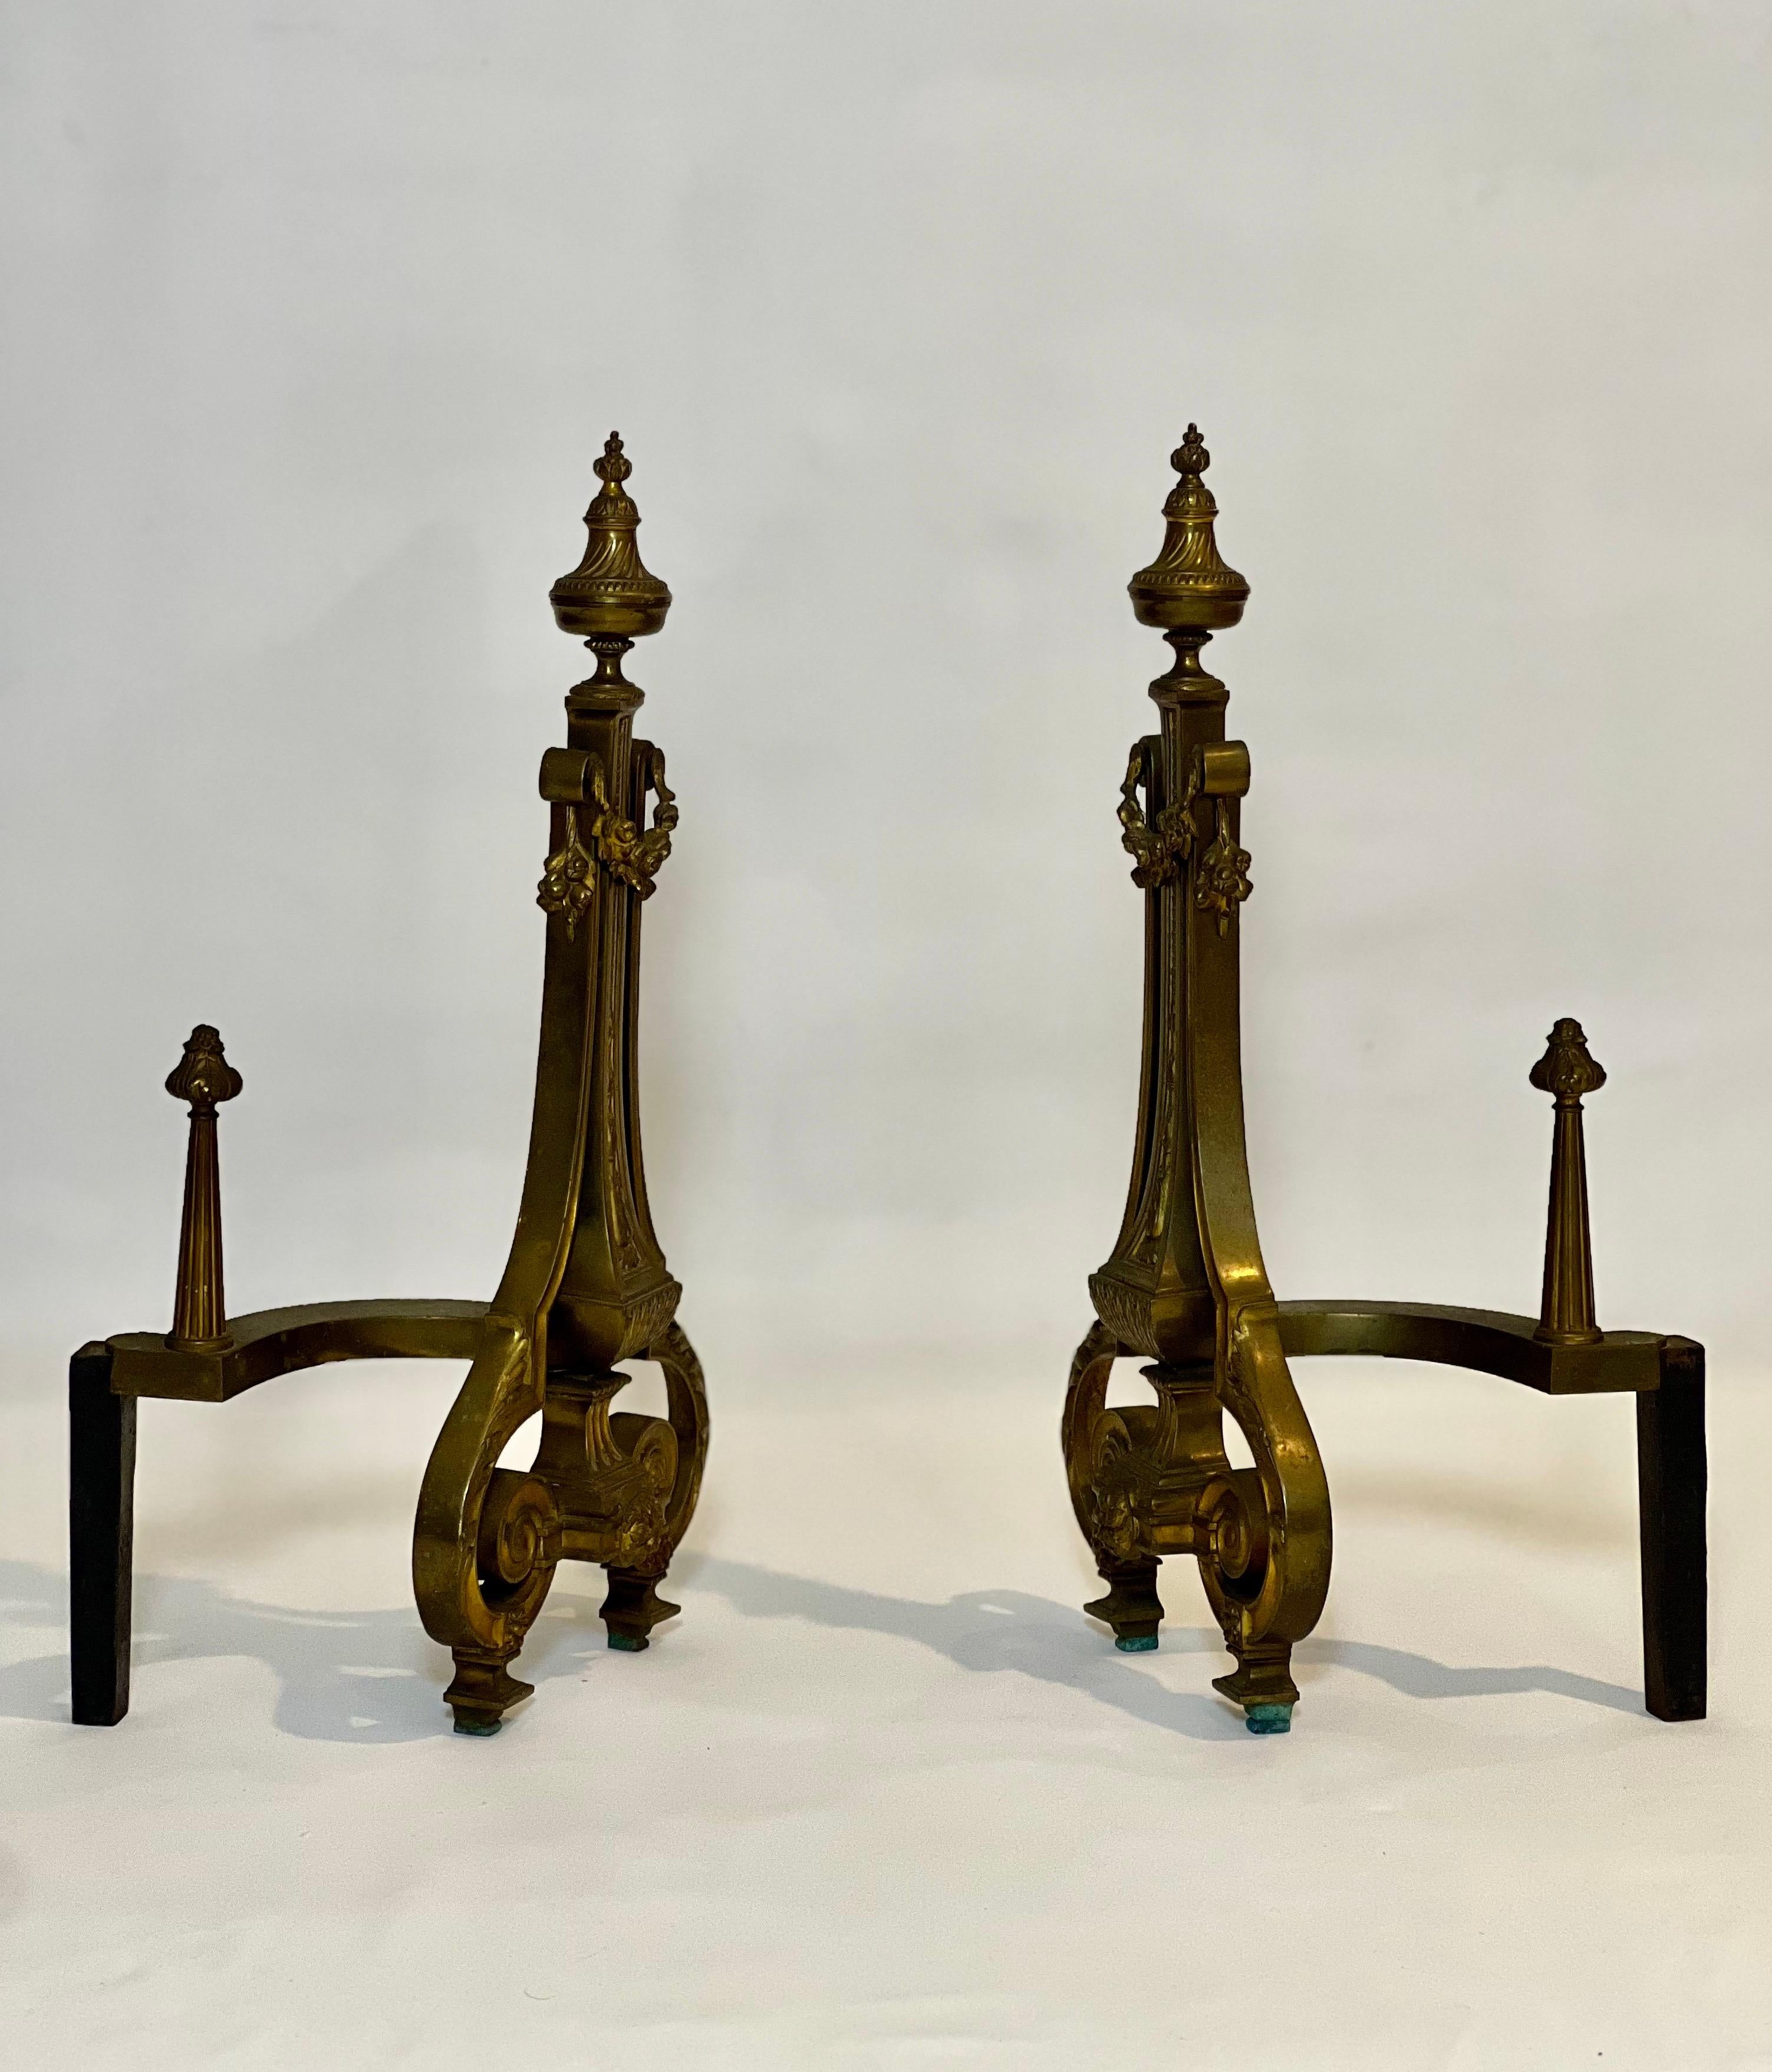 20th Century William H. Jackson Company Neoclassical French Empire Style Gilt Brass Andirons For Sale